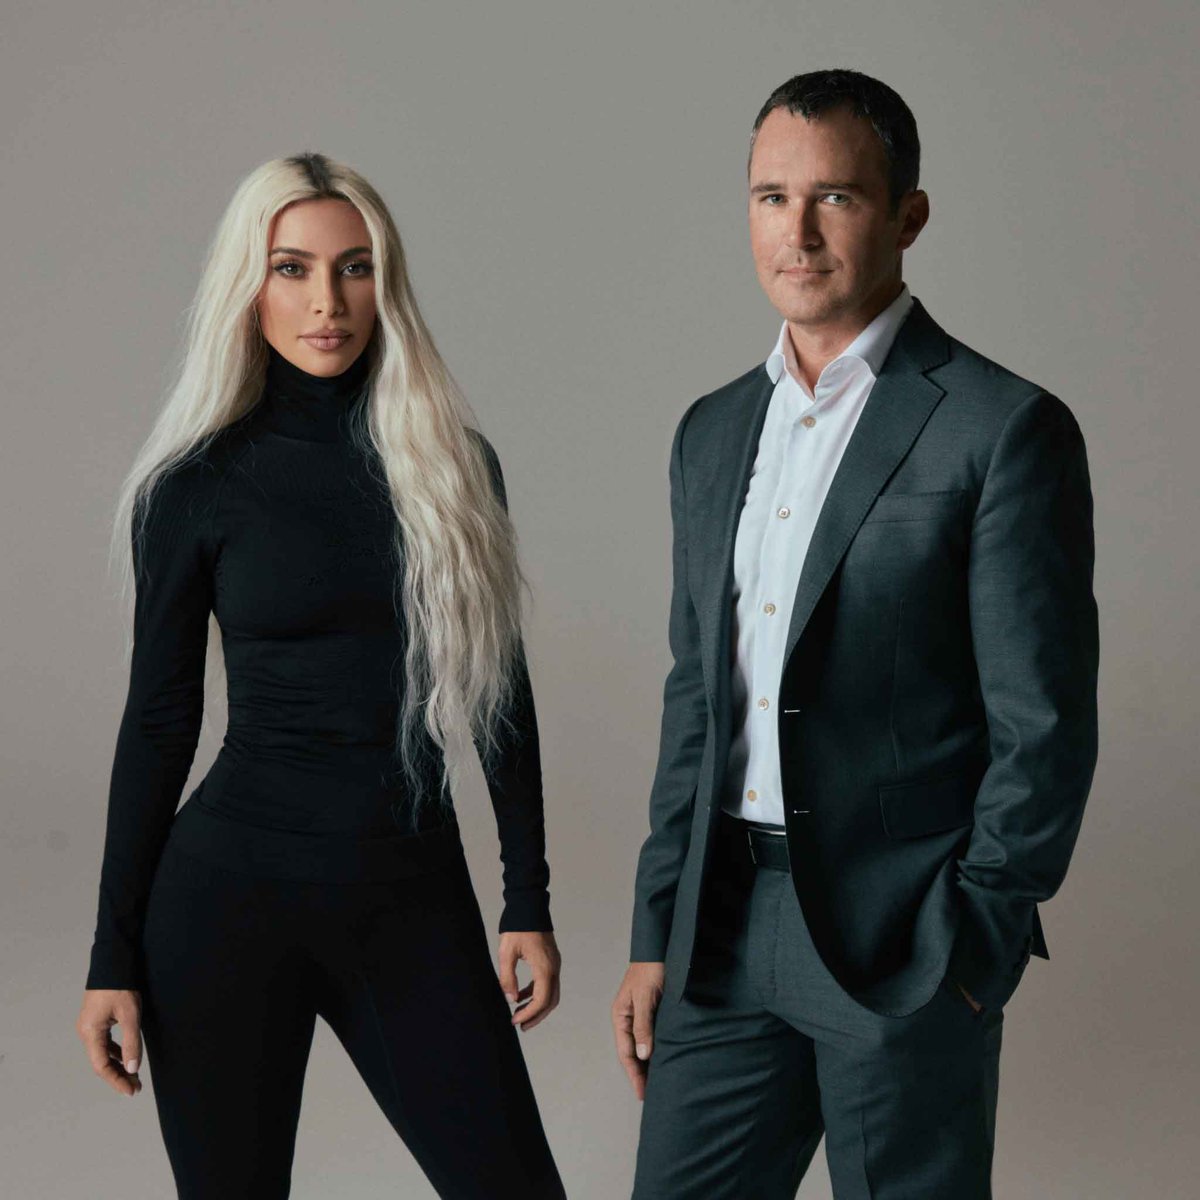 In the ultimate sign of the consumer markets, SKKY Partners (Kim K and Carlyle vet Jay Sammons) have raised only $121m of their $1-2B target after 18 months fundraising. Sidenote: Kardashian's stake in the firm is held in a vehicle called Favorite Daughter Inc. h/t @__rehurek